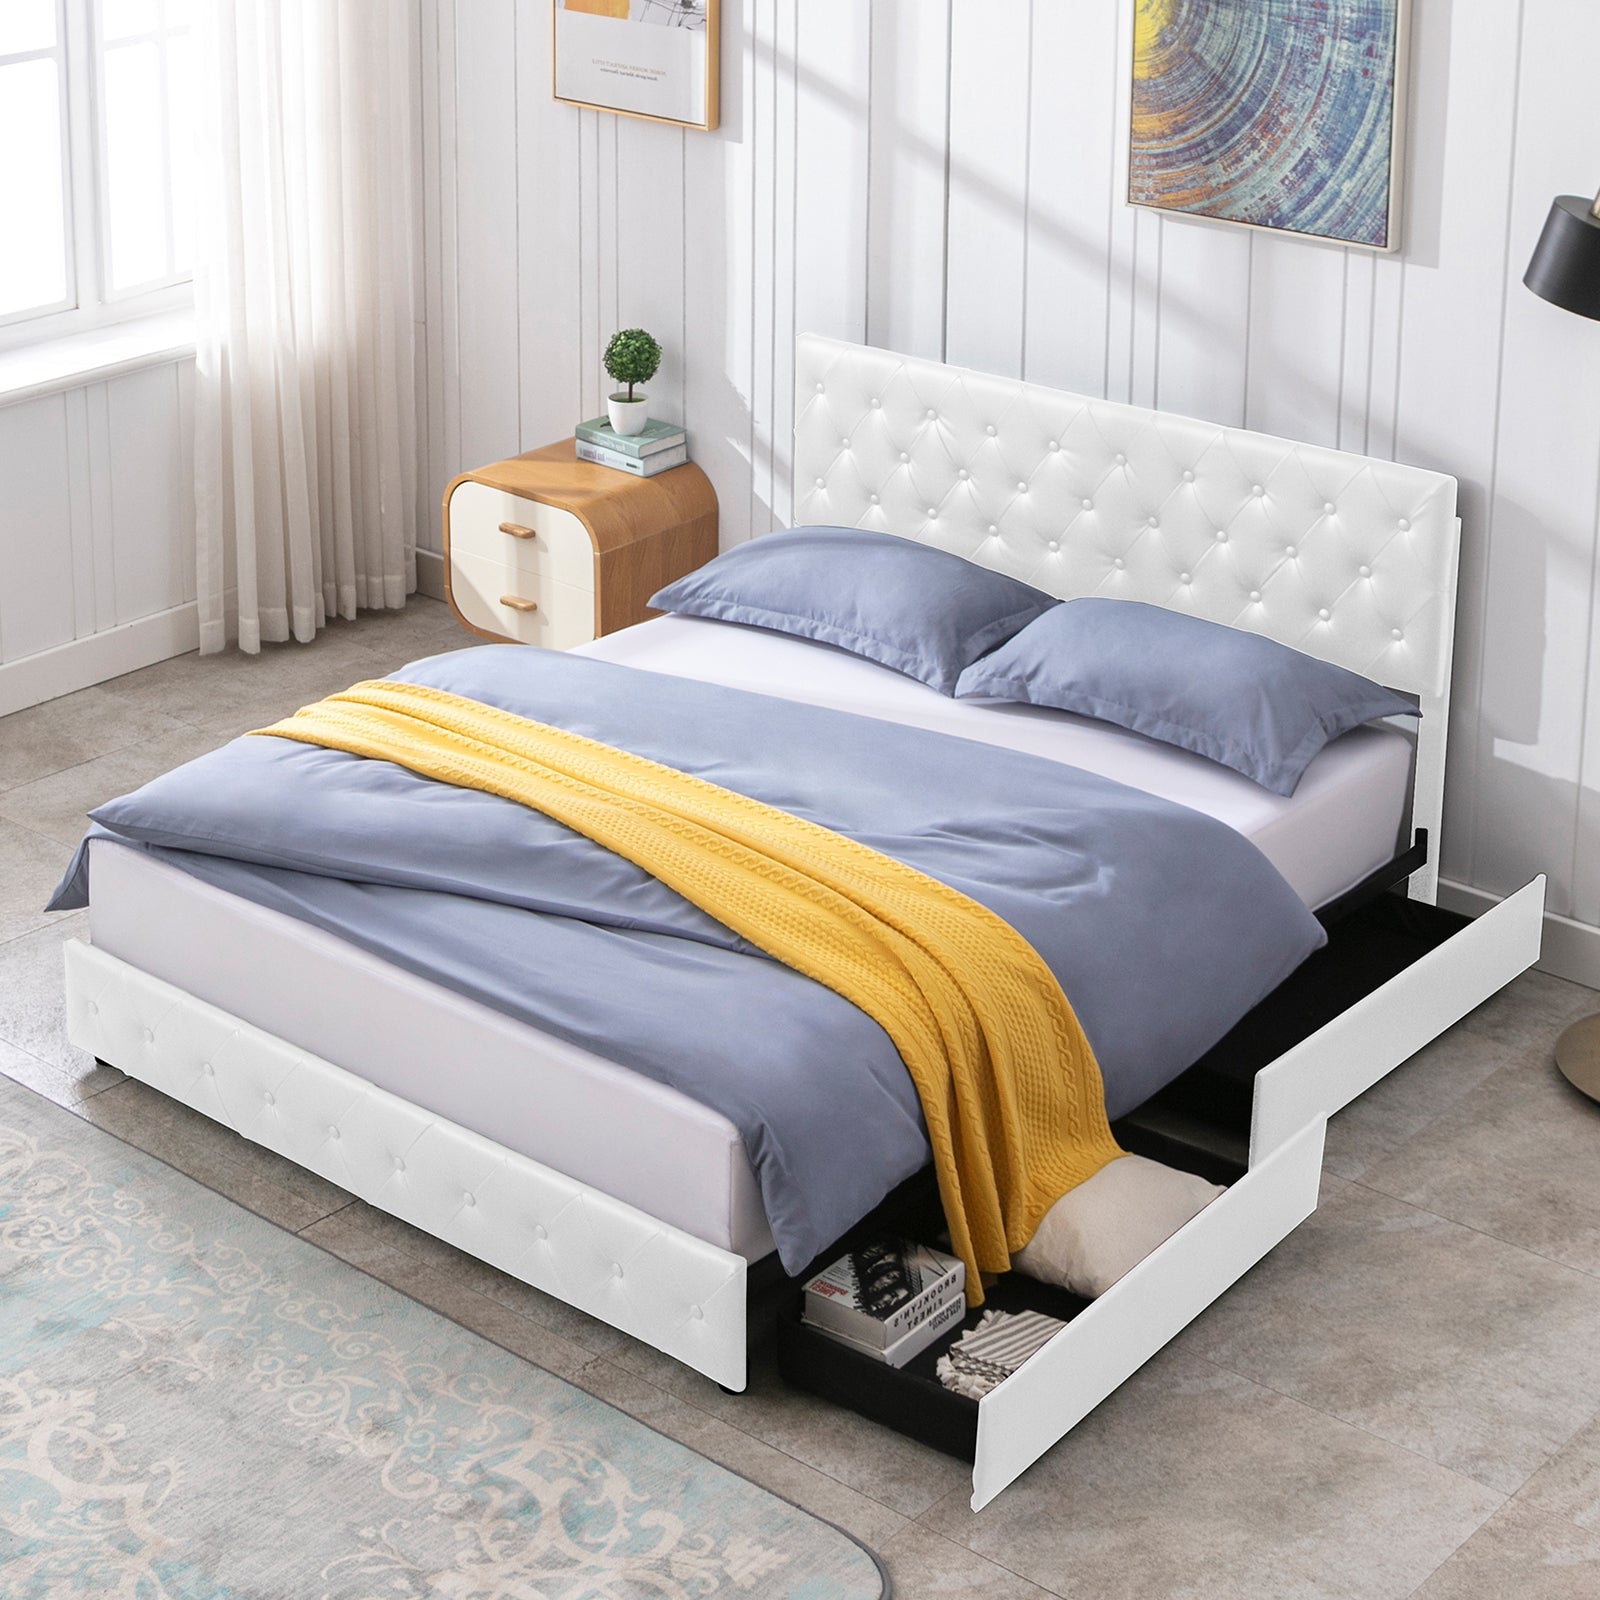 Drawer Bed | Storage Bed Frame with 4 Drawers with Adjustable Diamond Button Tufted Headboard - Mjkonebed frame